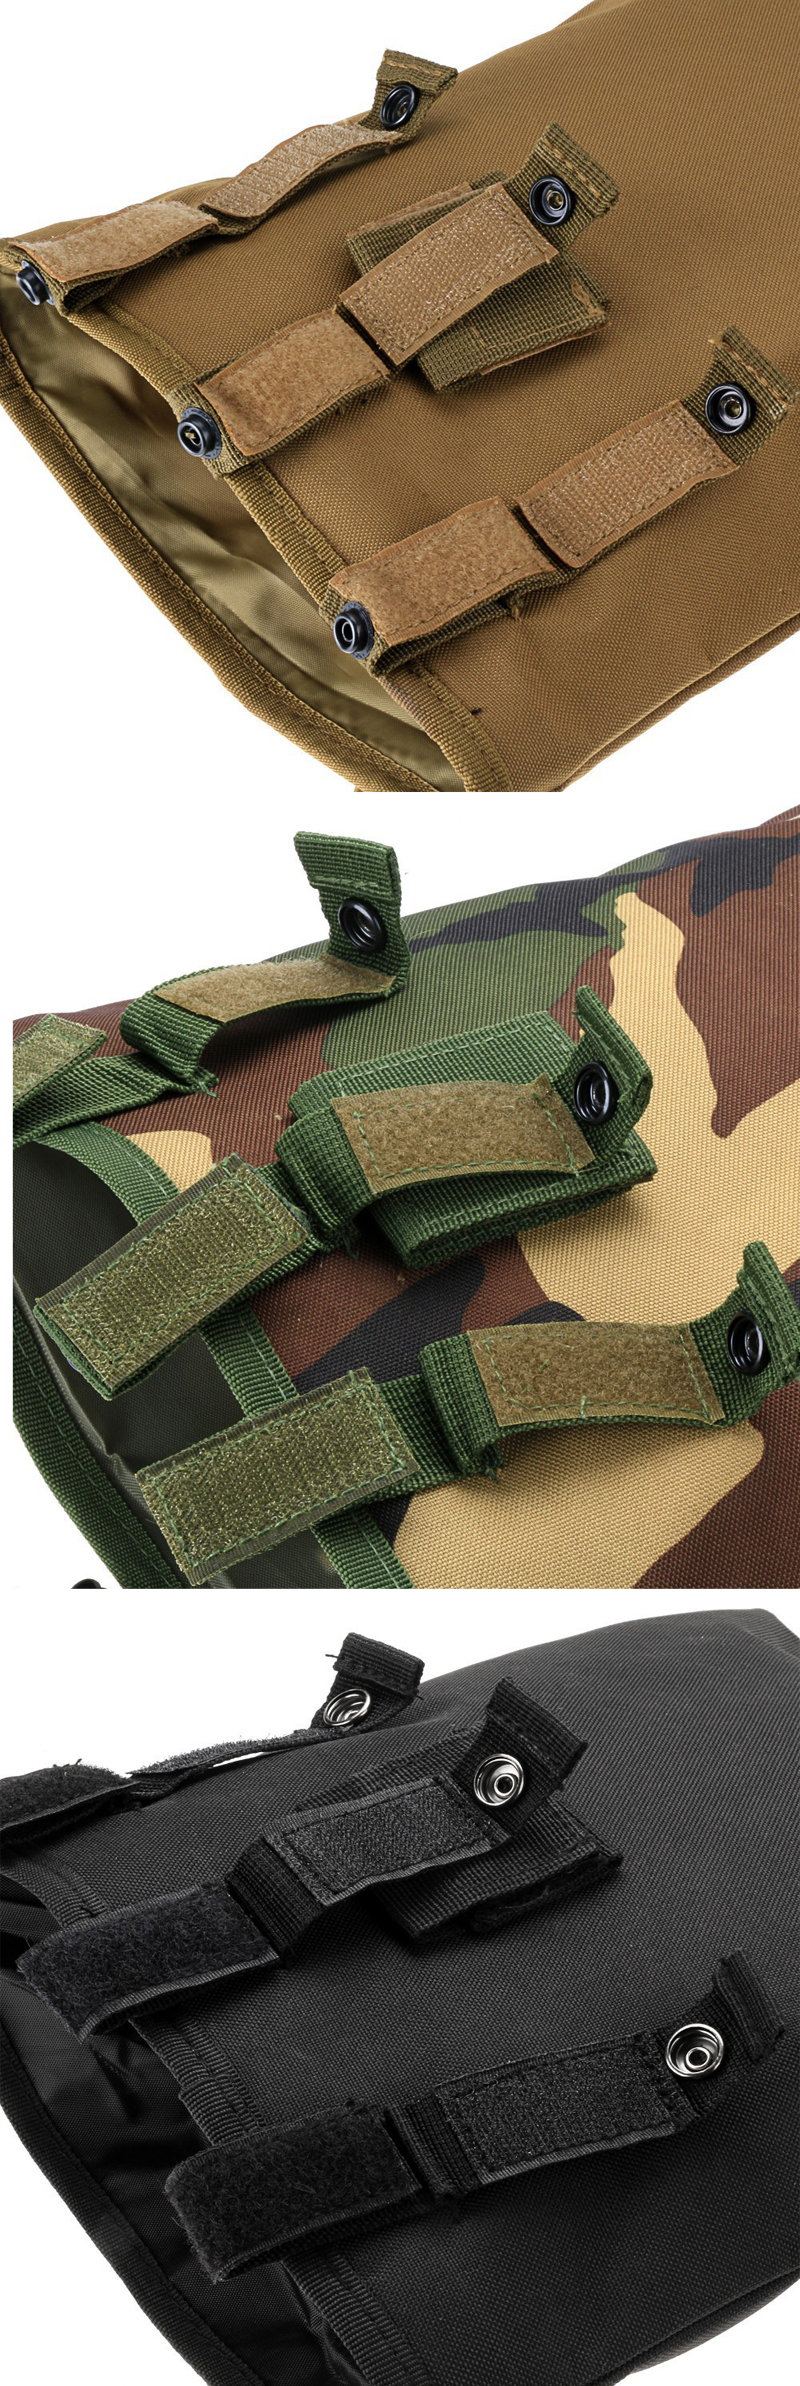 Molle-Outdoor-Large-Fishing-Bags-Recycle-Pouch-Travel-Storage-Bags-1065899-3